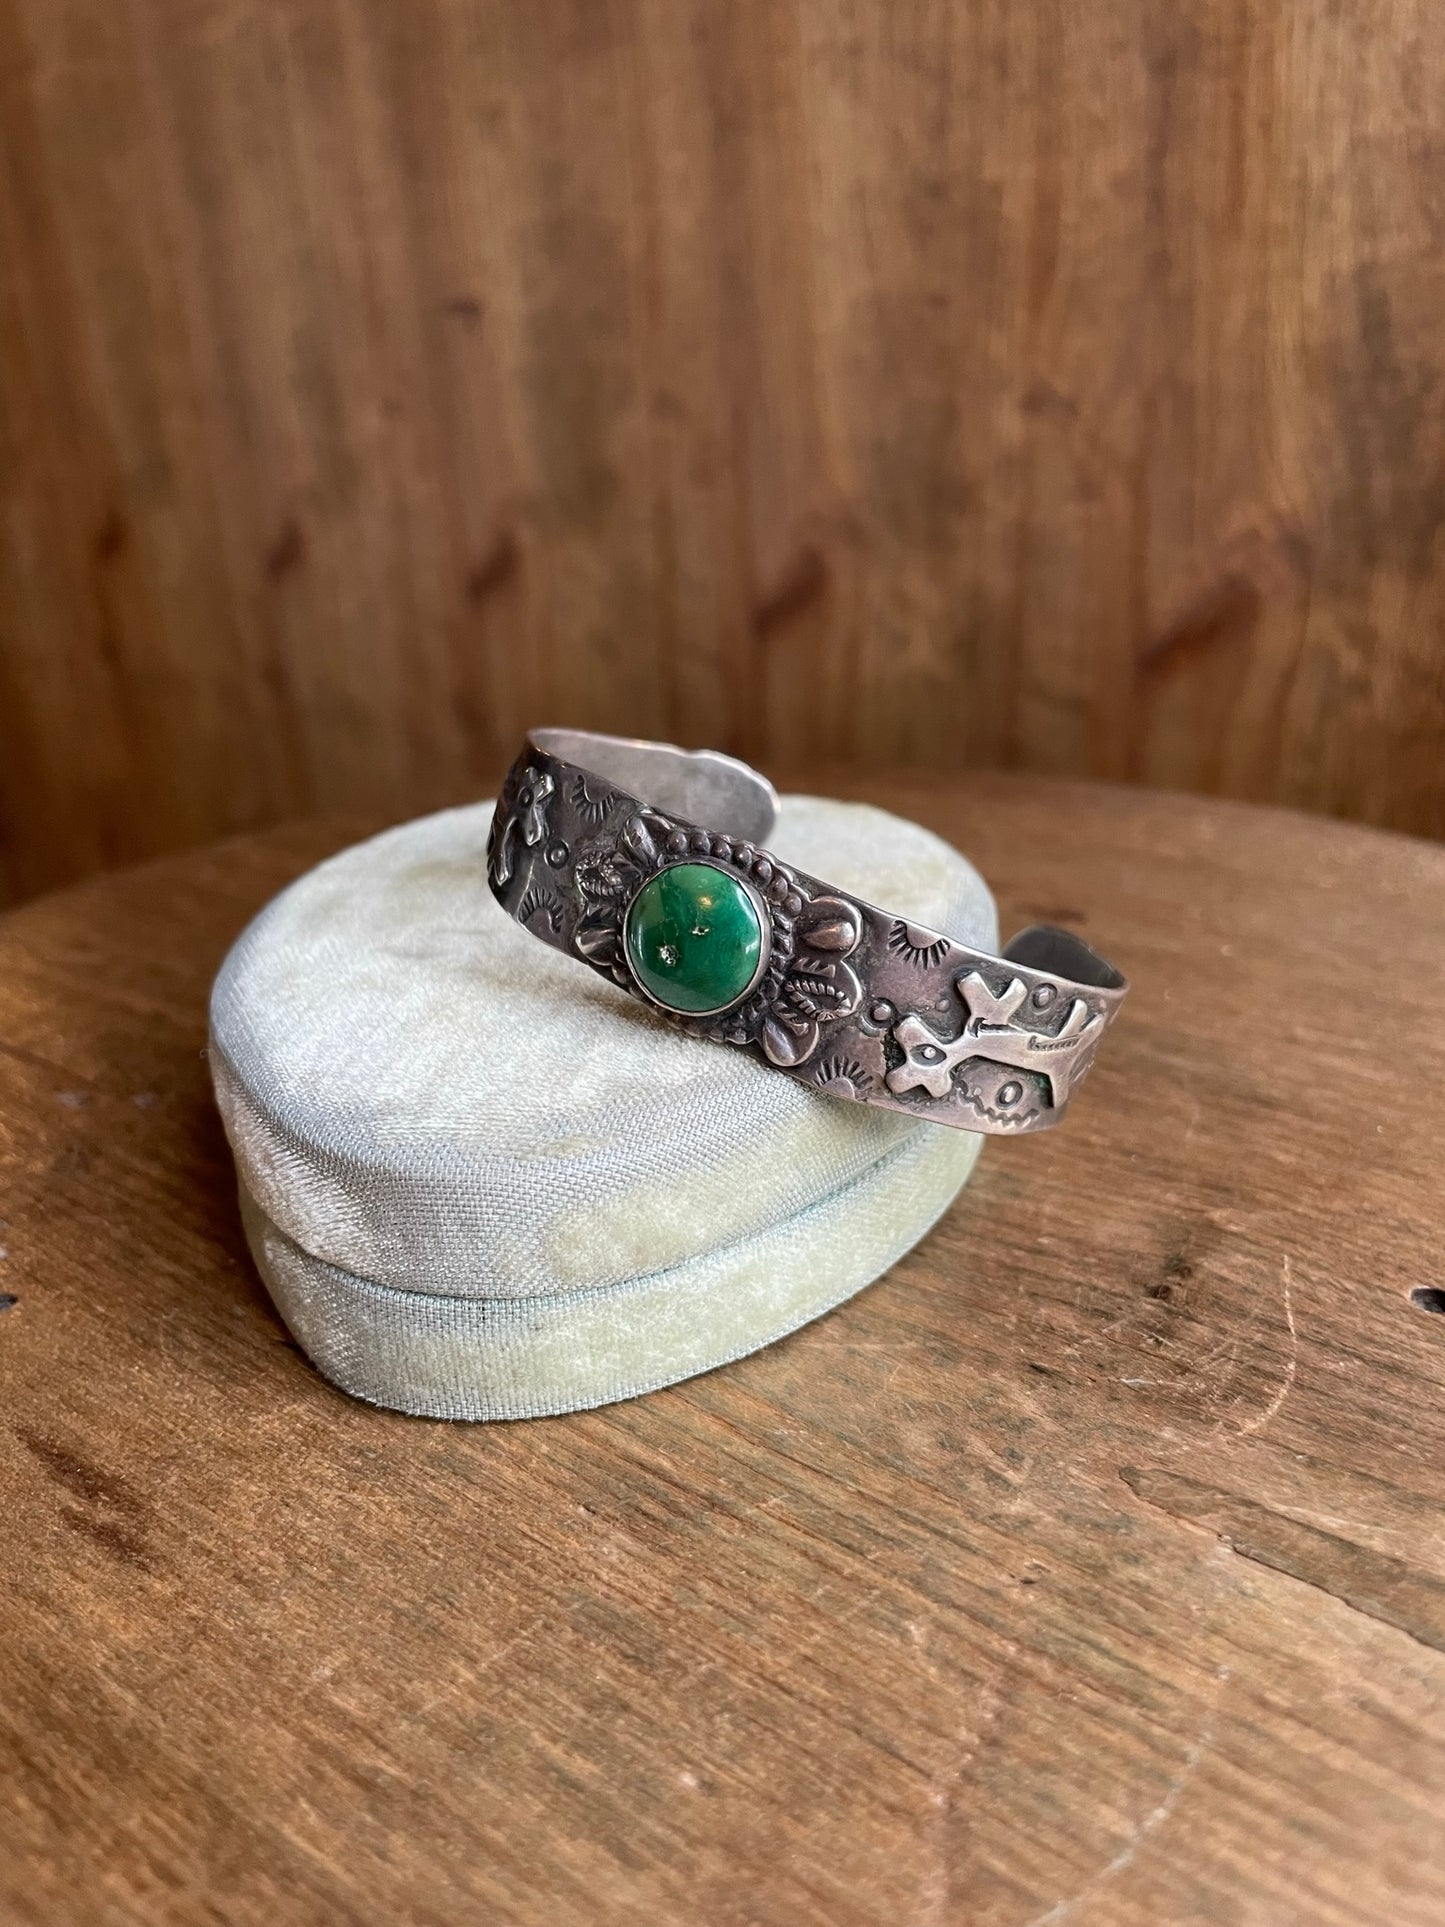 Navajo Engraved Silver Cuff with Turquoise stone